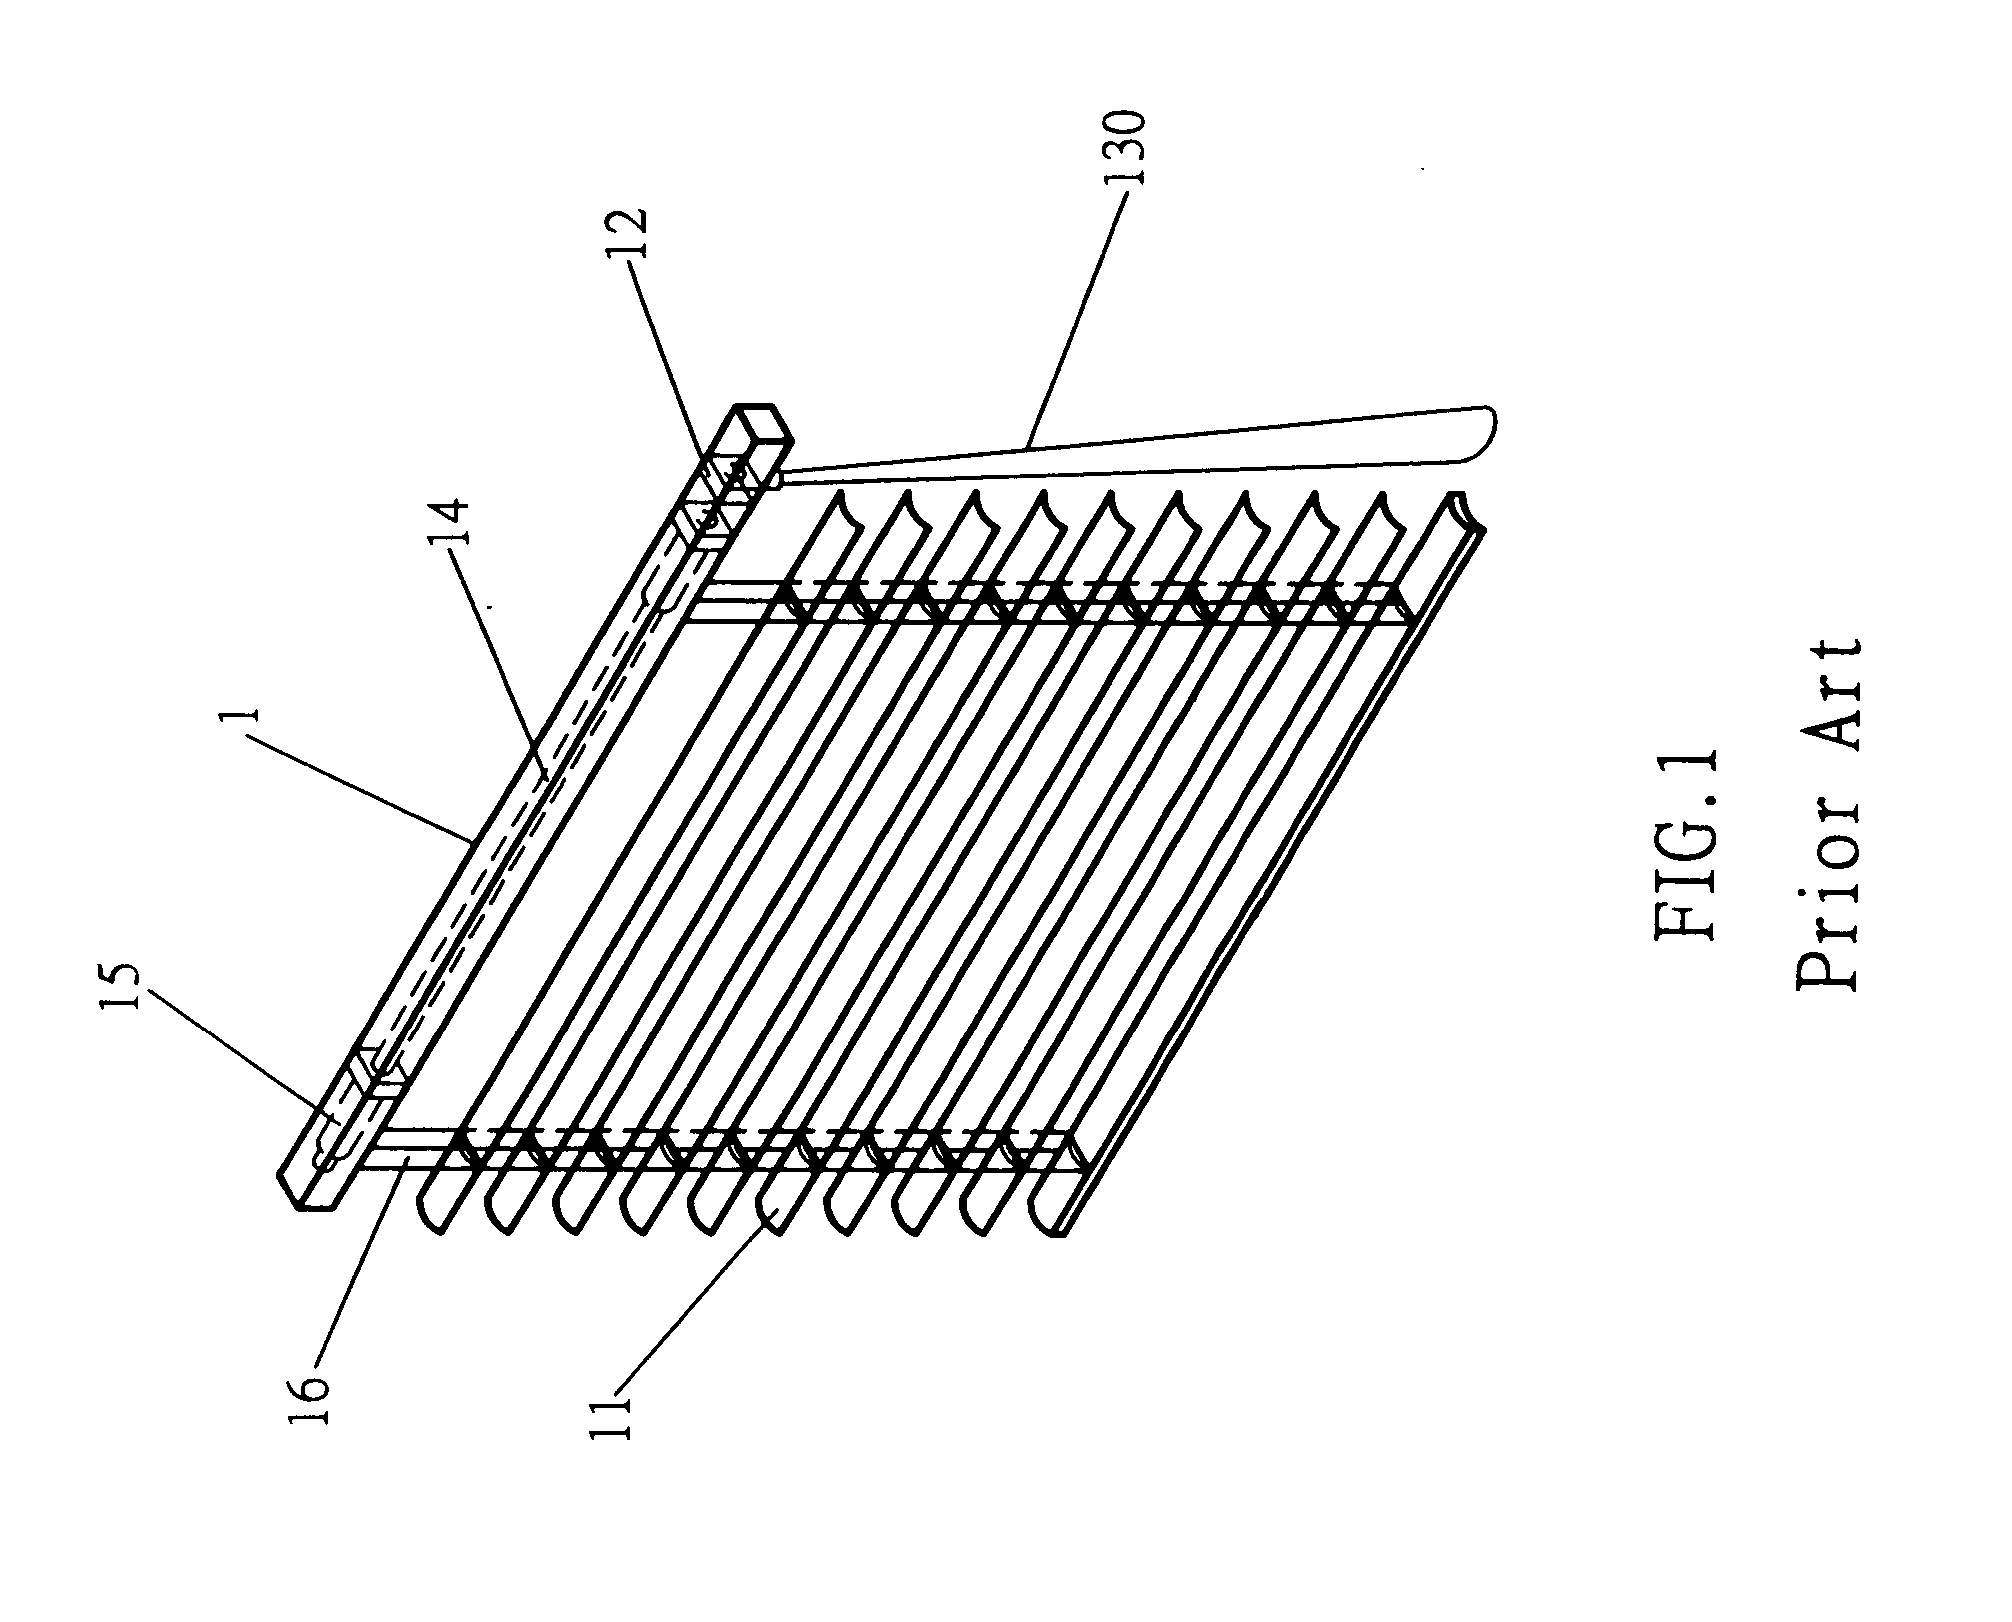 Curtain blind take-up drive mechanism with non-slip effect